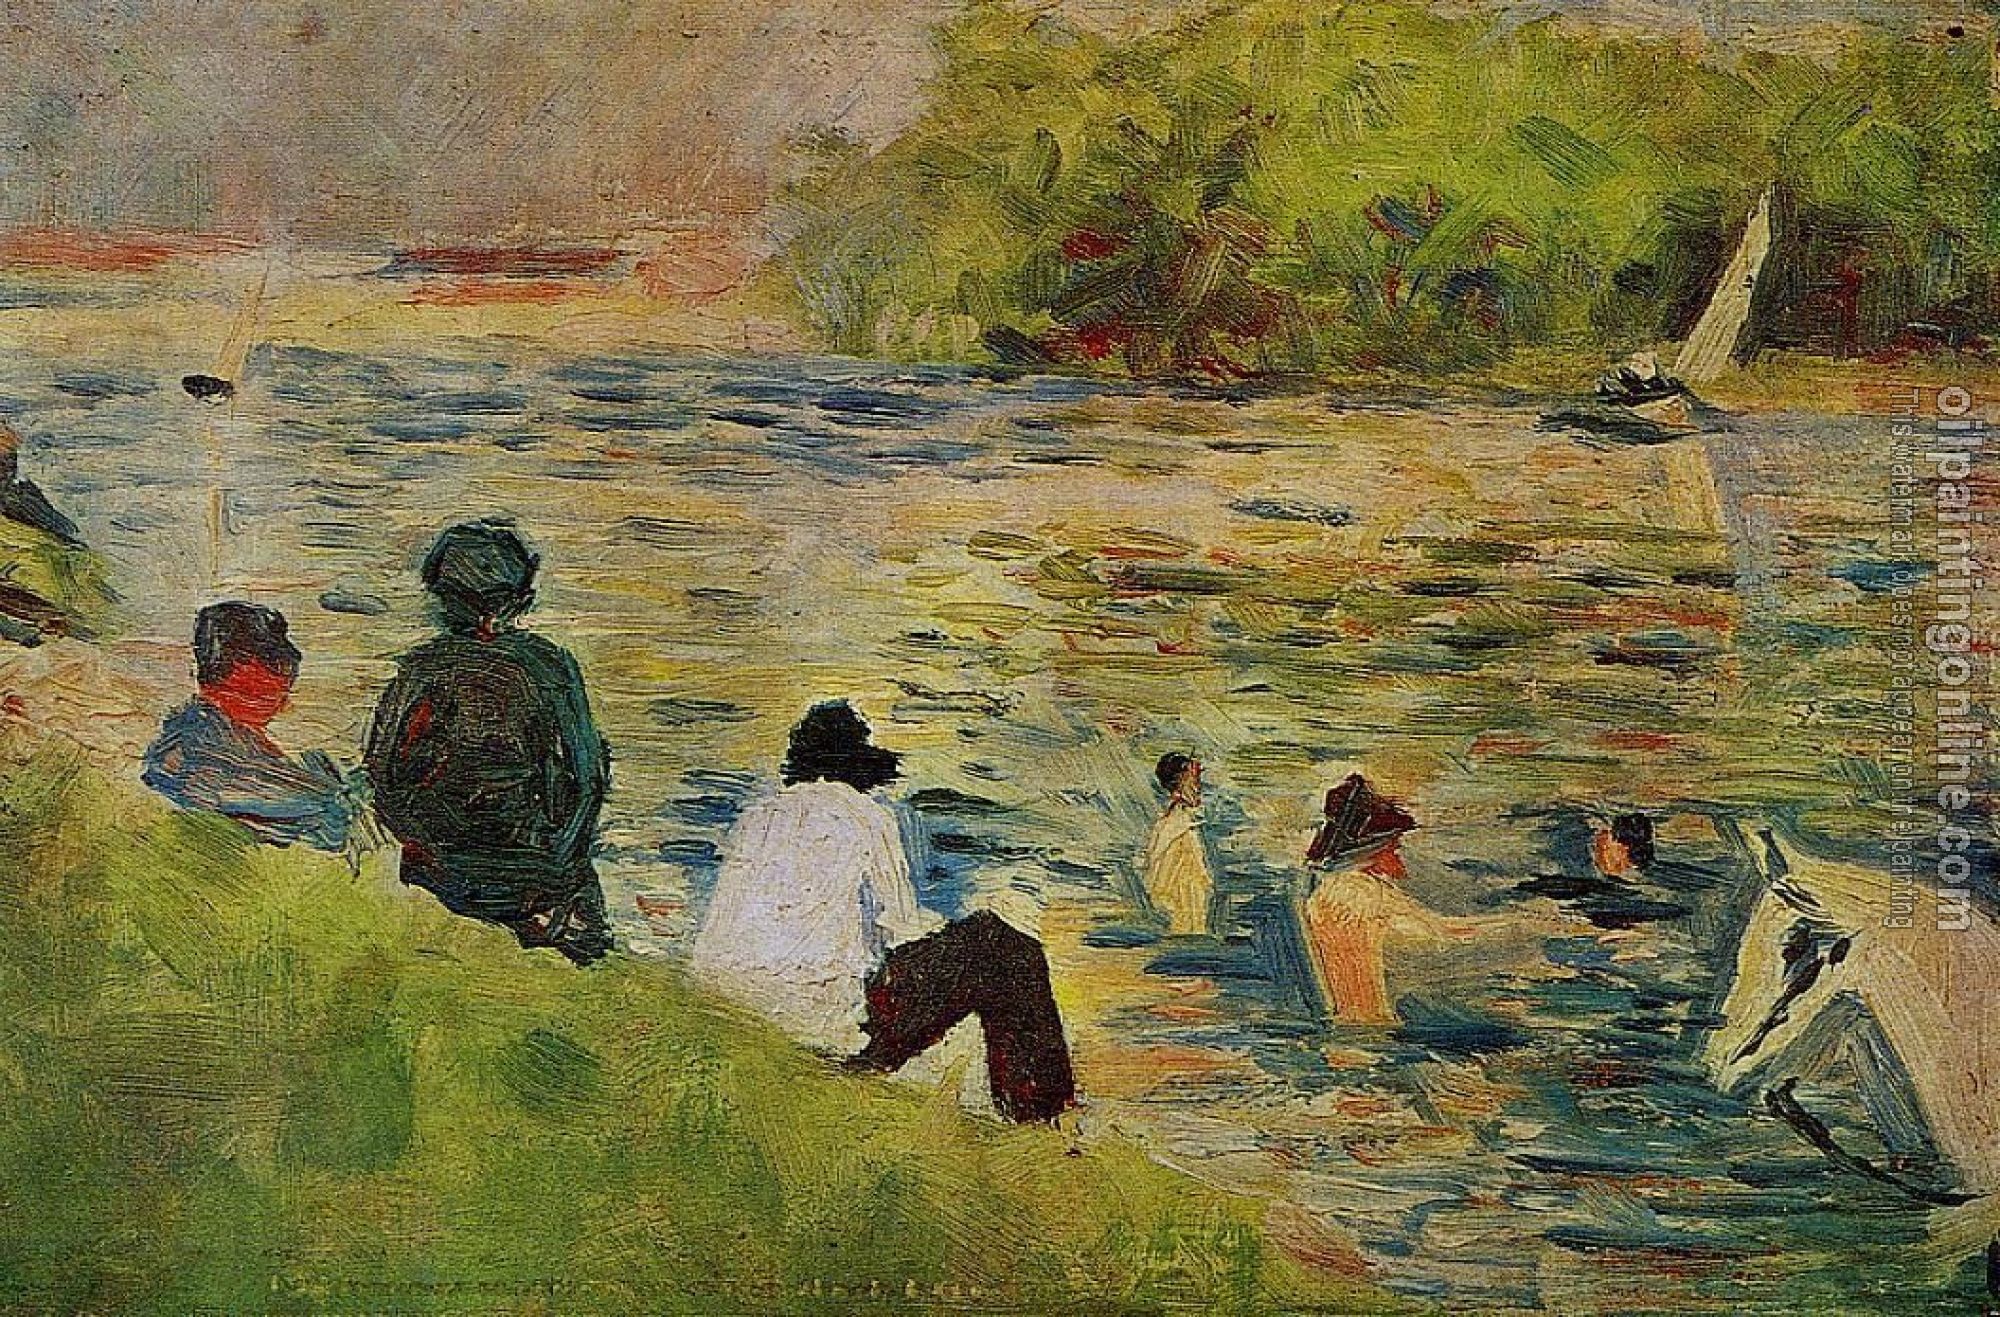 Seurat, Georges - Bathing at Asnieres, The Bank of the Seine